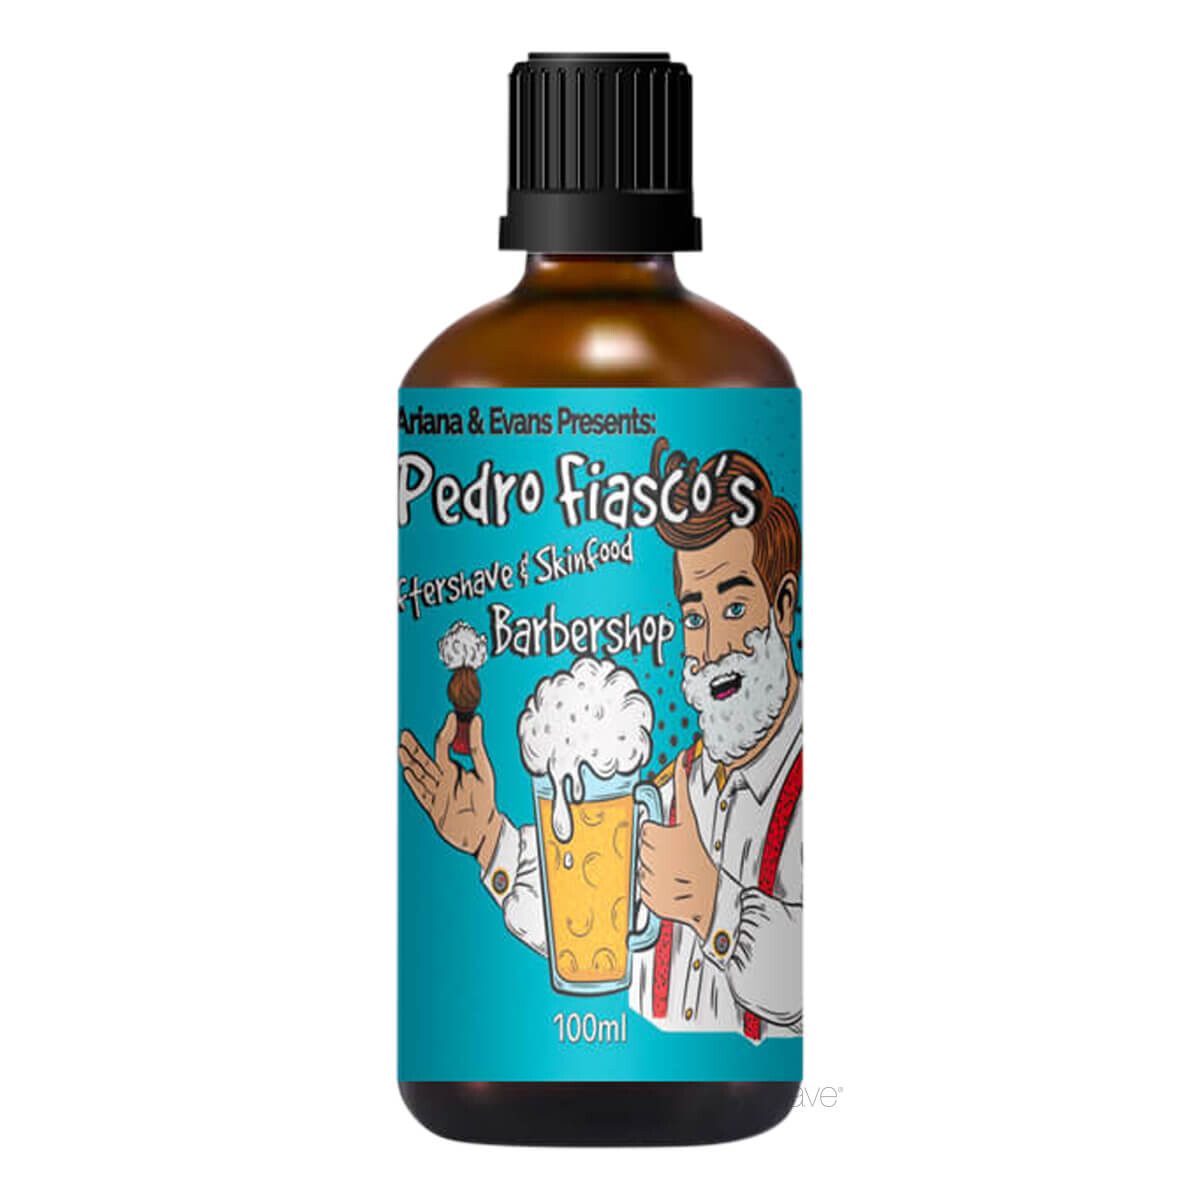 Ariana & Evans Aftershave, Pedro Fiasco's Barbershop, 100 ml.